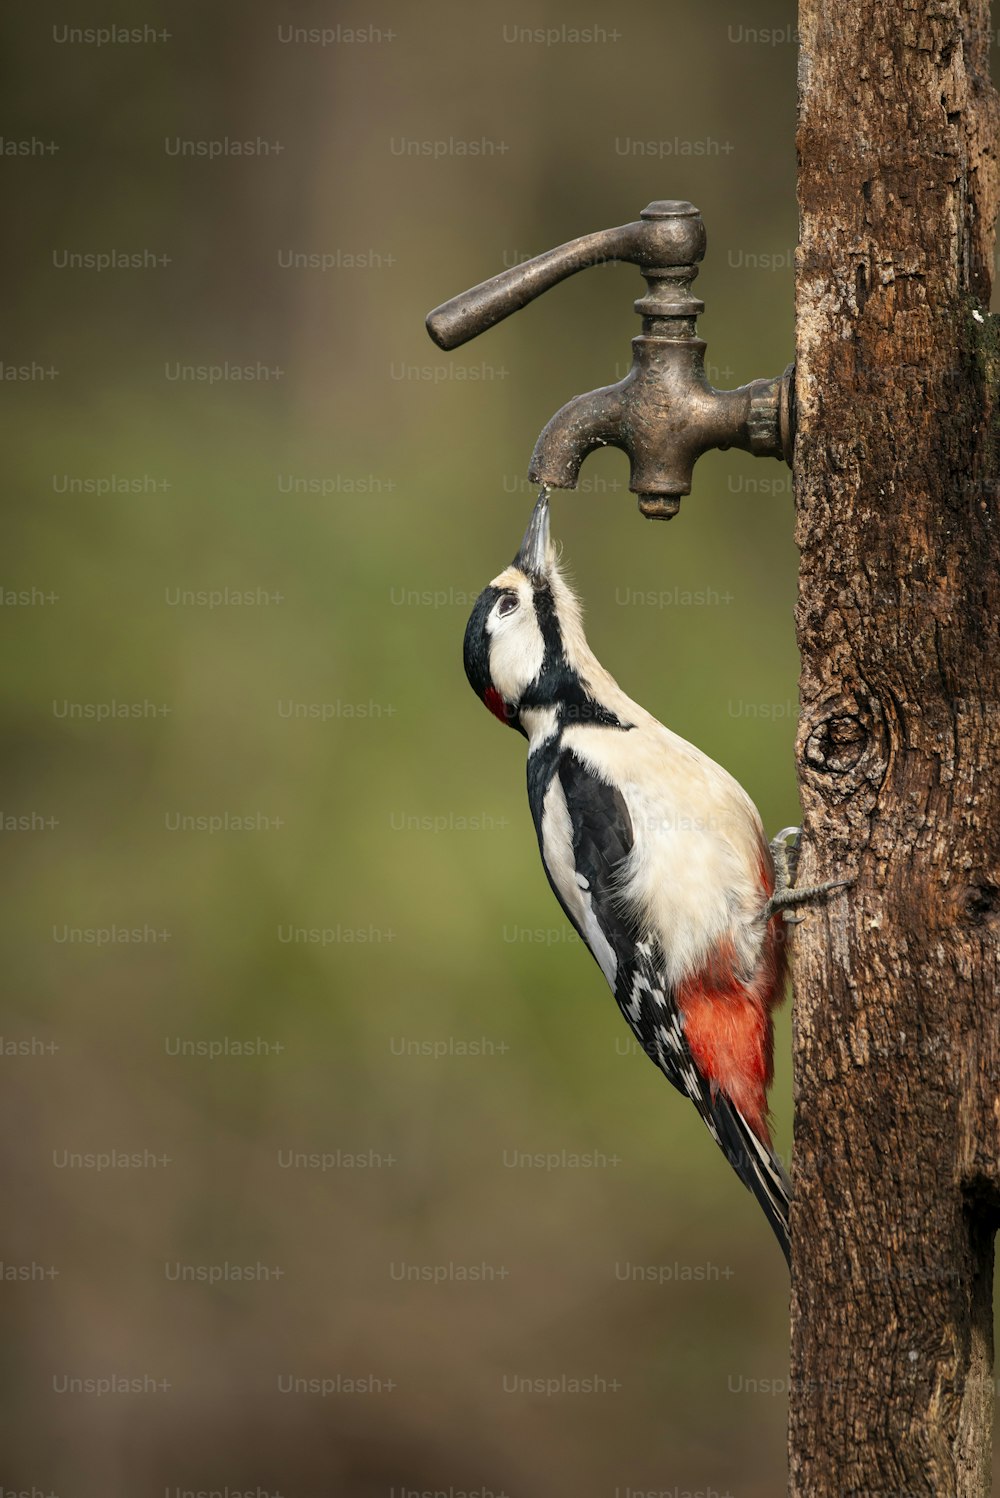 Beautiful image of Leser Spotted Woodepecker Dendrocopos Minor on side of wooden post in Spring sunshine feeding from tap